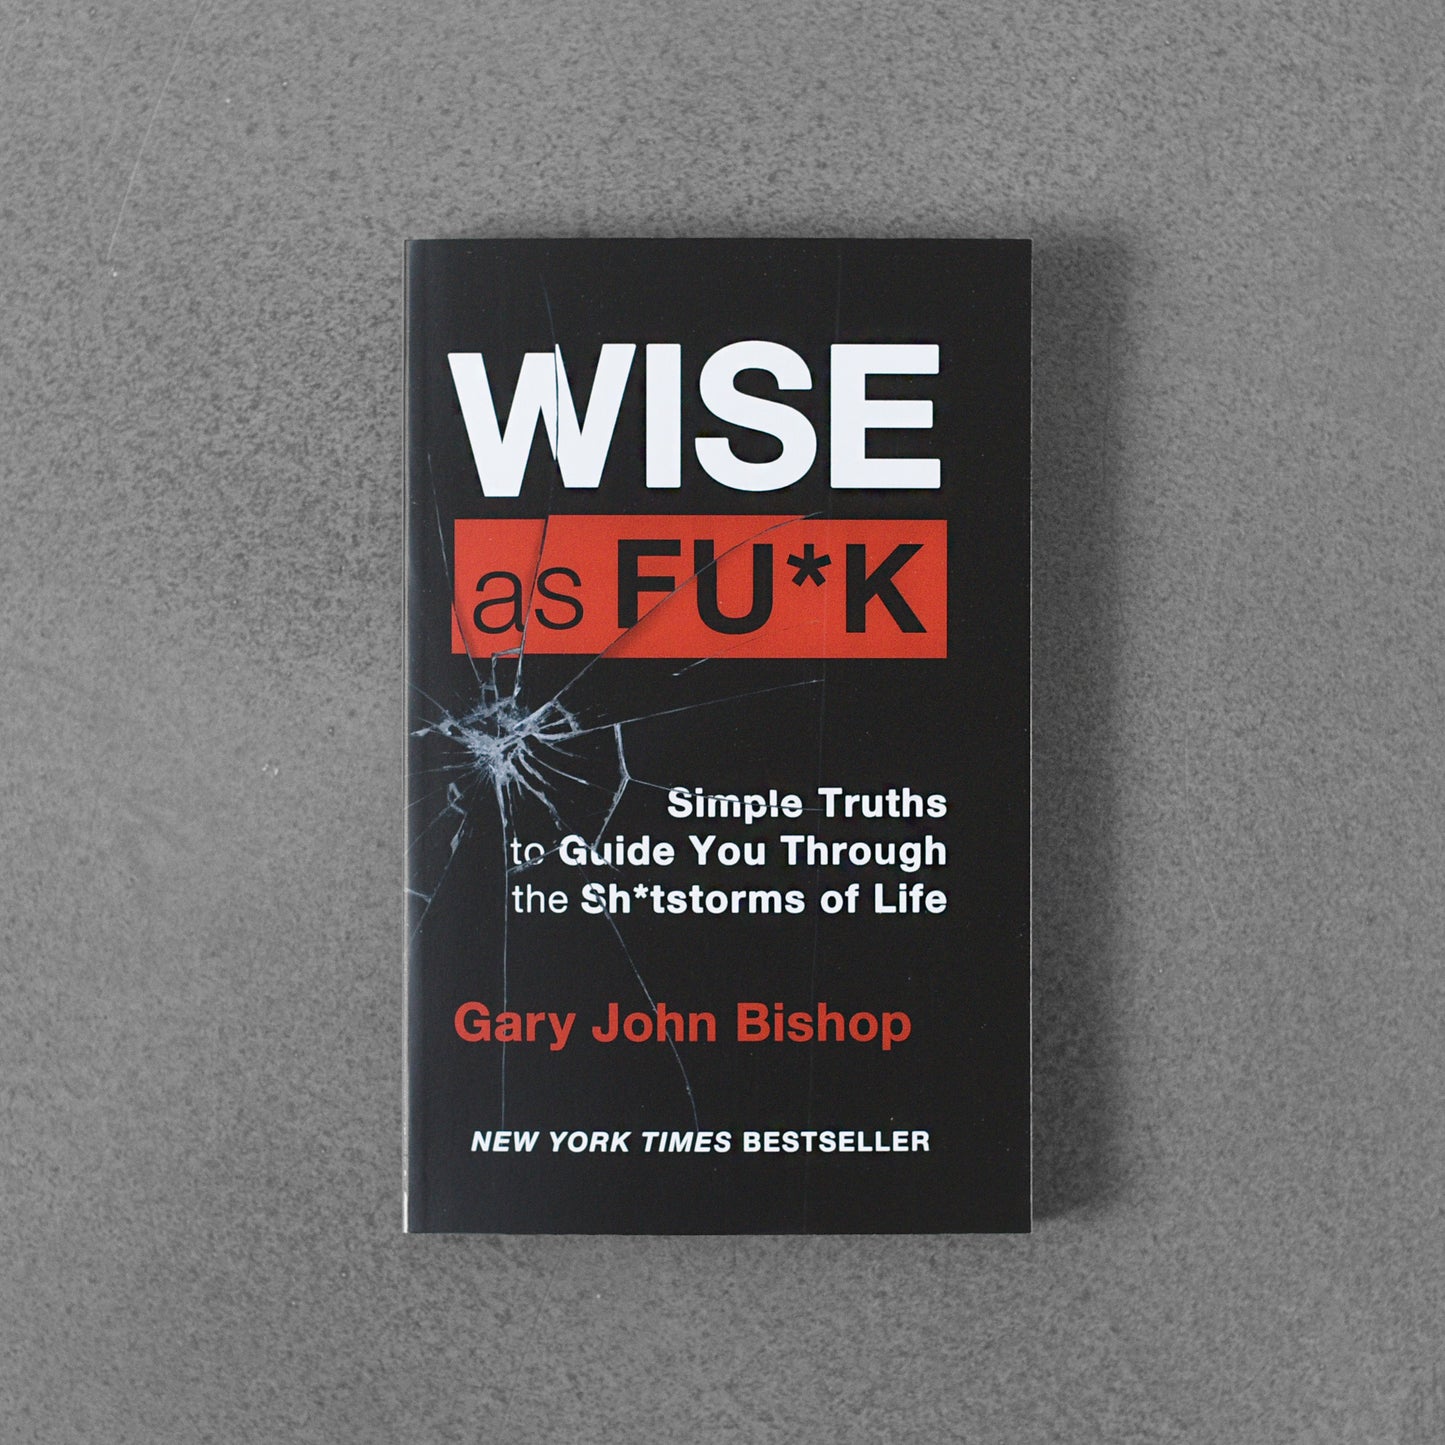 Wise as Fu*k: Simple Truths to Guide You Through the Sh*tstorms of Your Life - Gary John Bishop